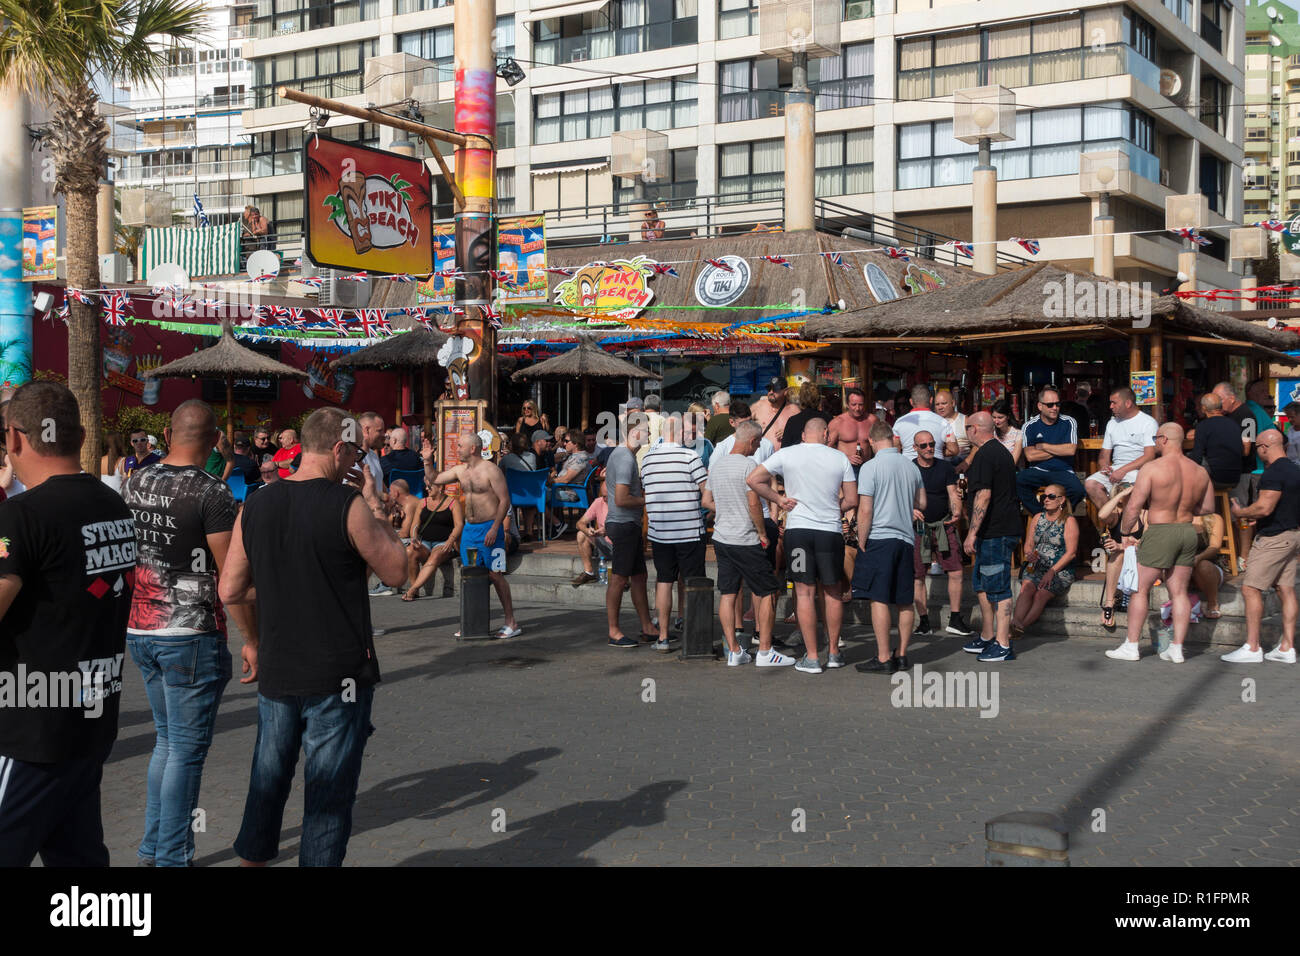 Benidorm, Costa Blanca, Spain 12th November 2018. The Tiki Beach Bar on Benidorm Levante Beach, a favourite hangout for British holidaymakers is still open despite recent reports that it was shutting down due to complaints about unruly behaviour. Staff were seen outside taking drinks off customers on the promenade and pouring them into plastic glasses. Boozy Brits have been blamed for anti-social behaviour at the popular beach front music bar. Credit: Mick Flynn/Alamy Live News Stock Photo